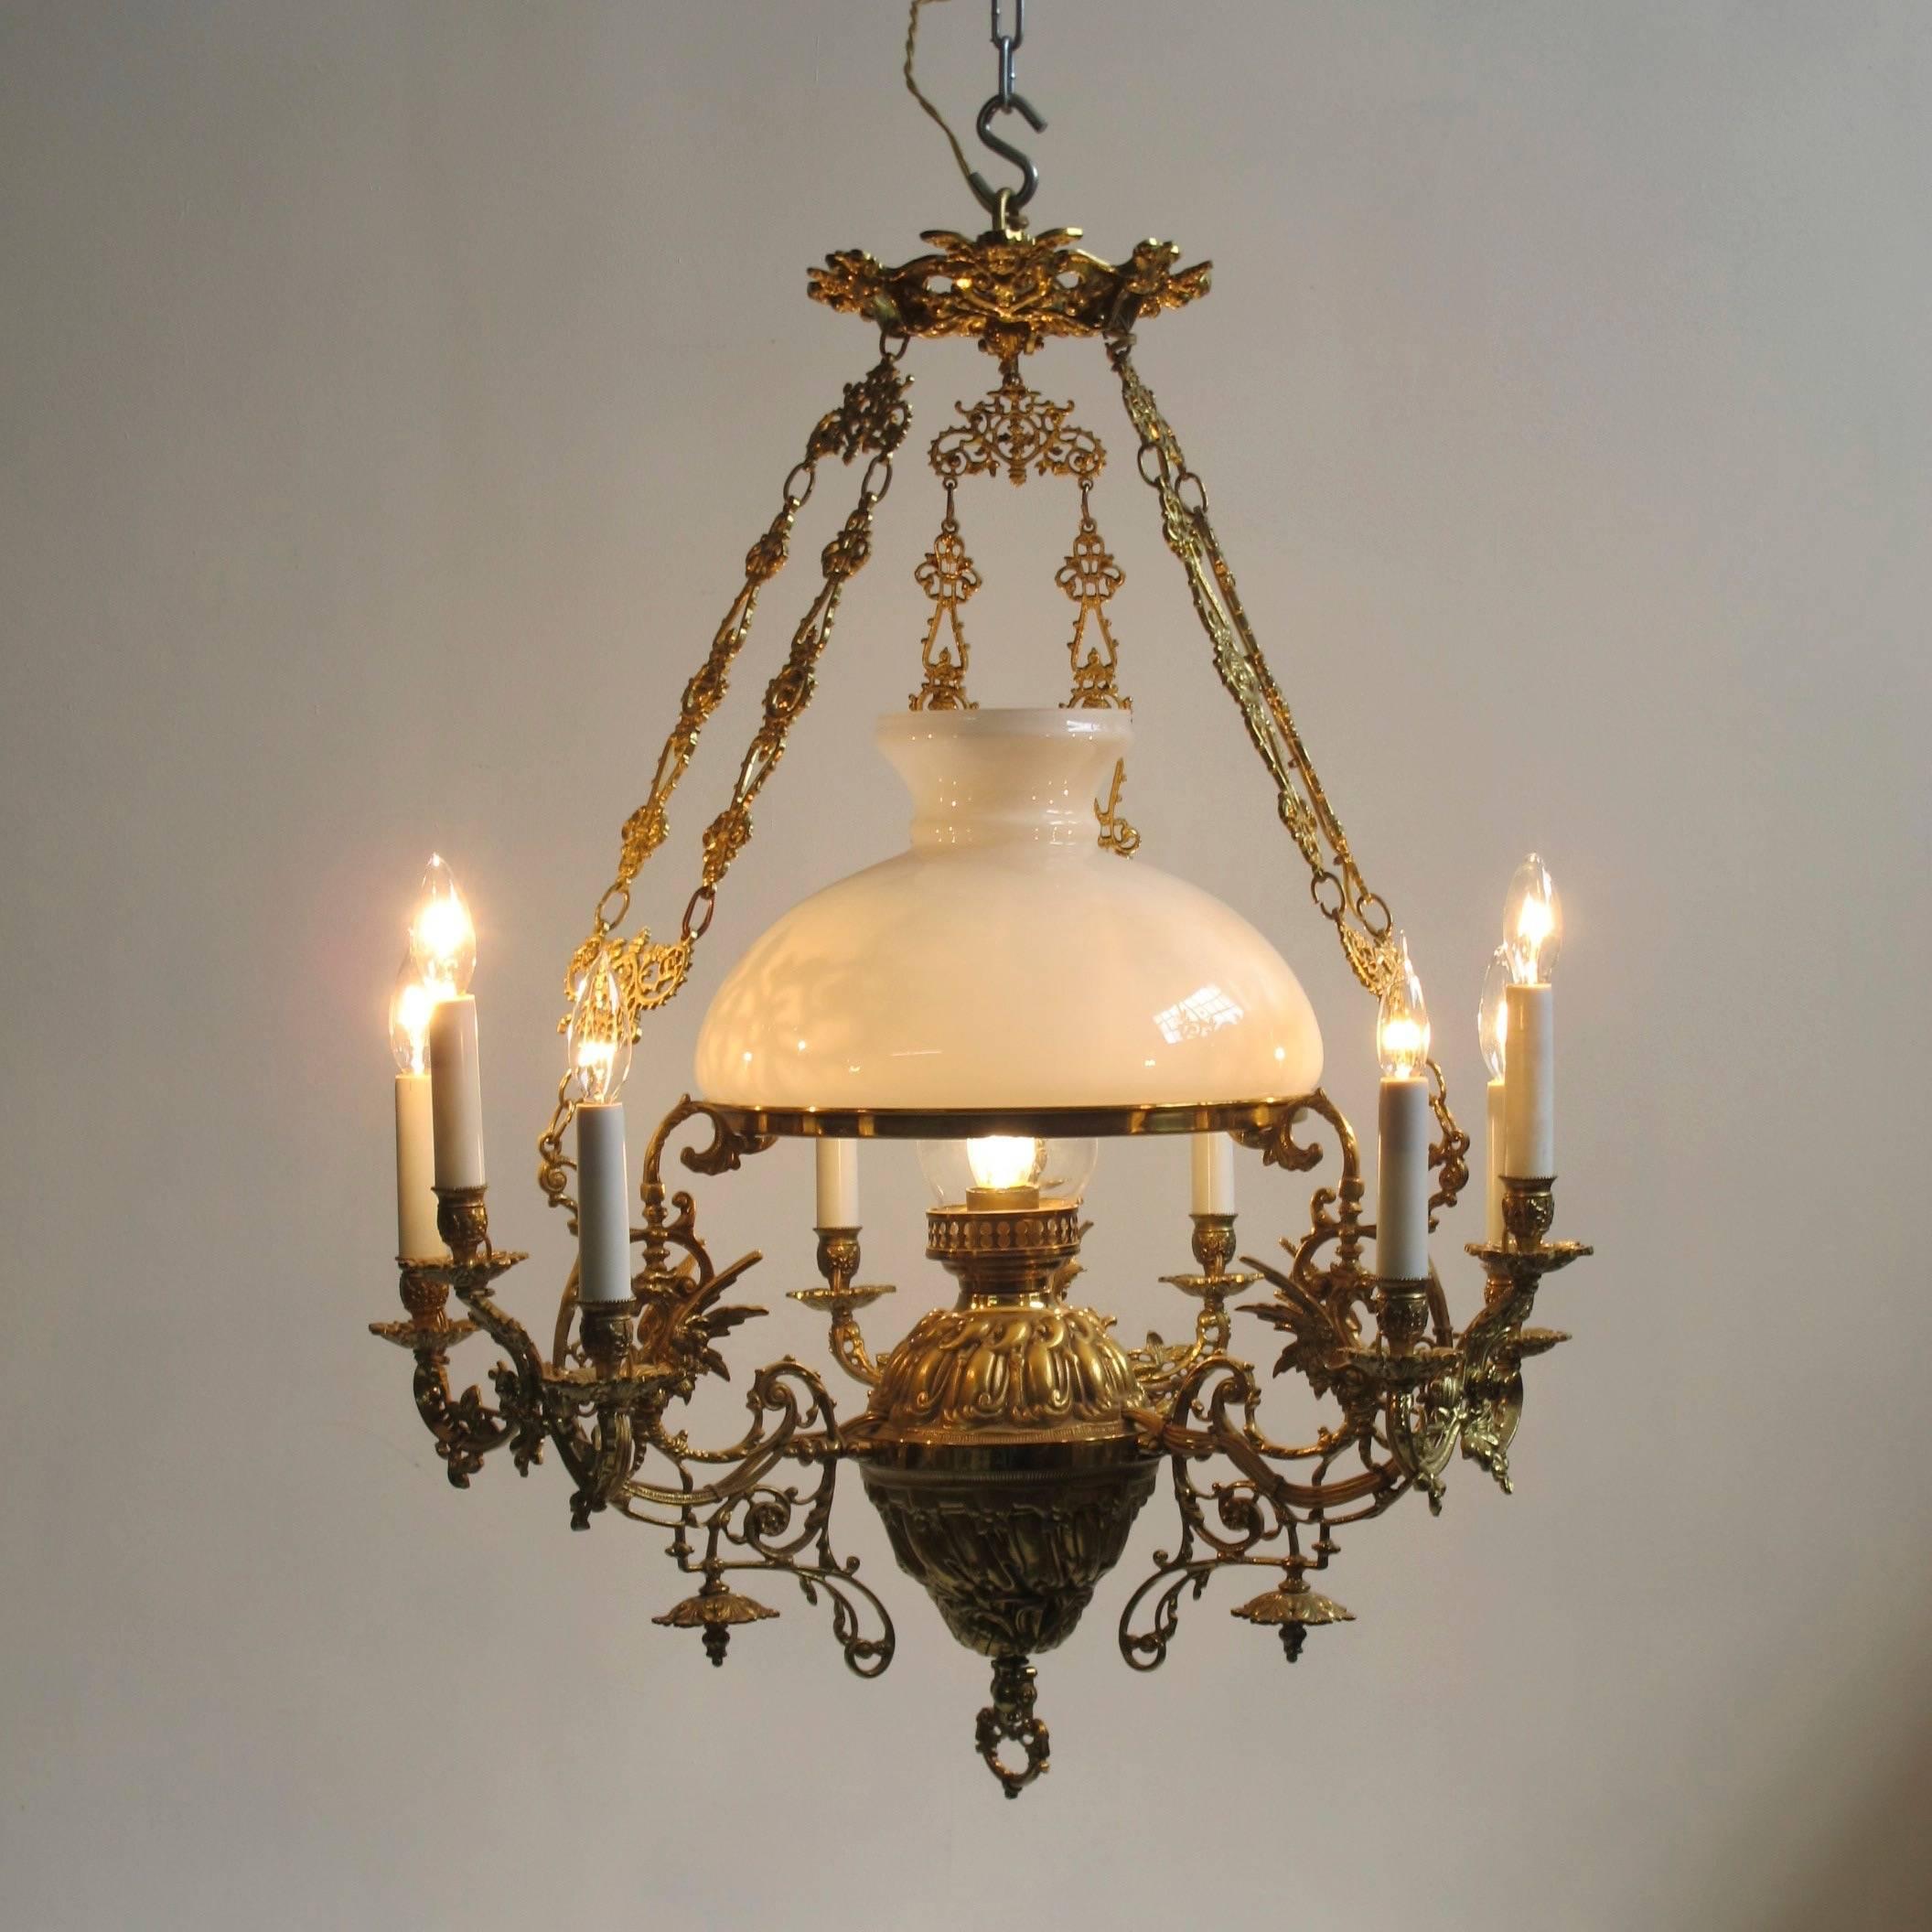 Solid brass kerosene and candle light fixture now electrified and restored. Original glass shade and with ten arms electrified with chandelier size bulbs. Excellent quality. Dutch, circa 1880-1900.